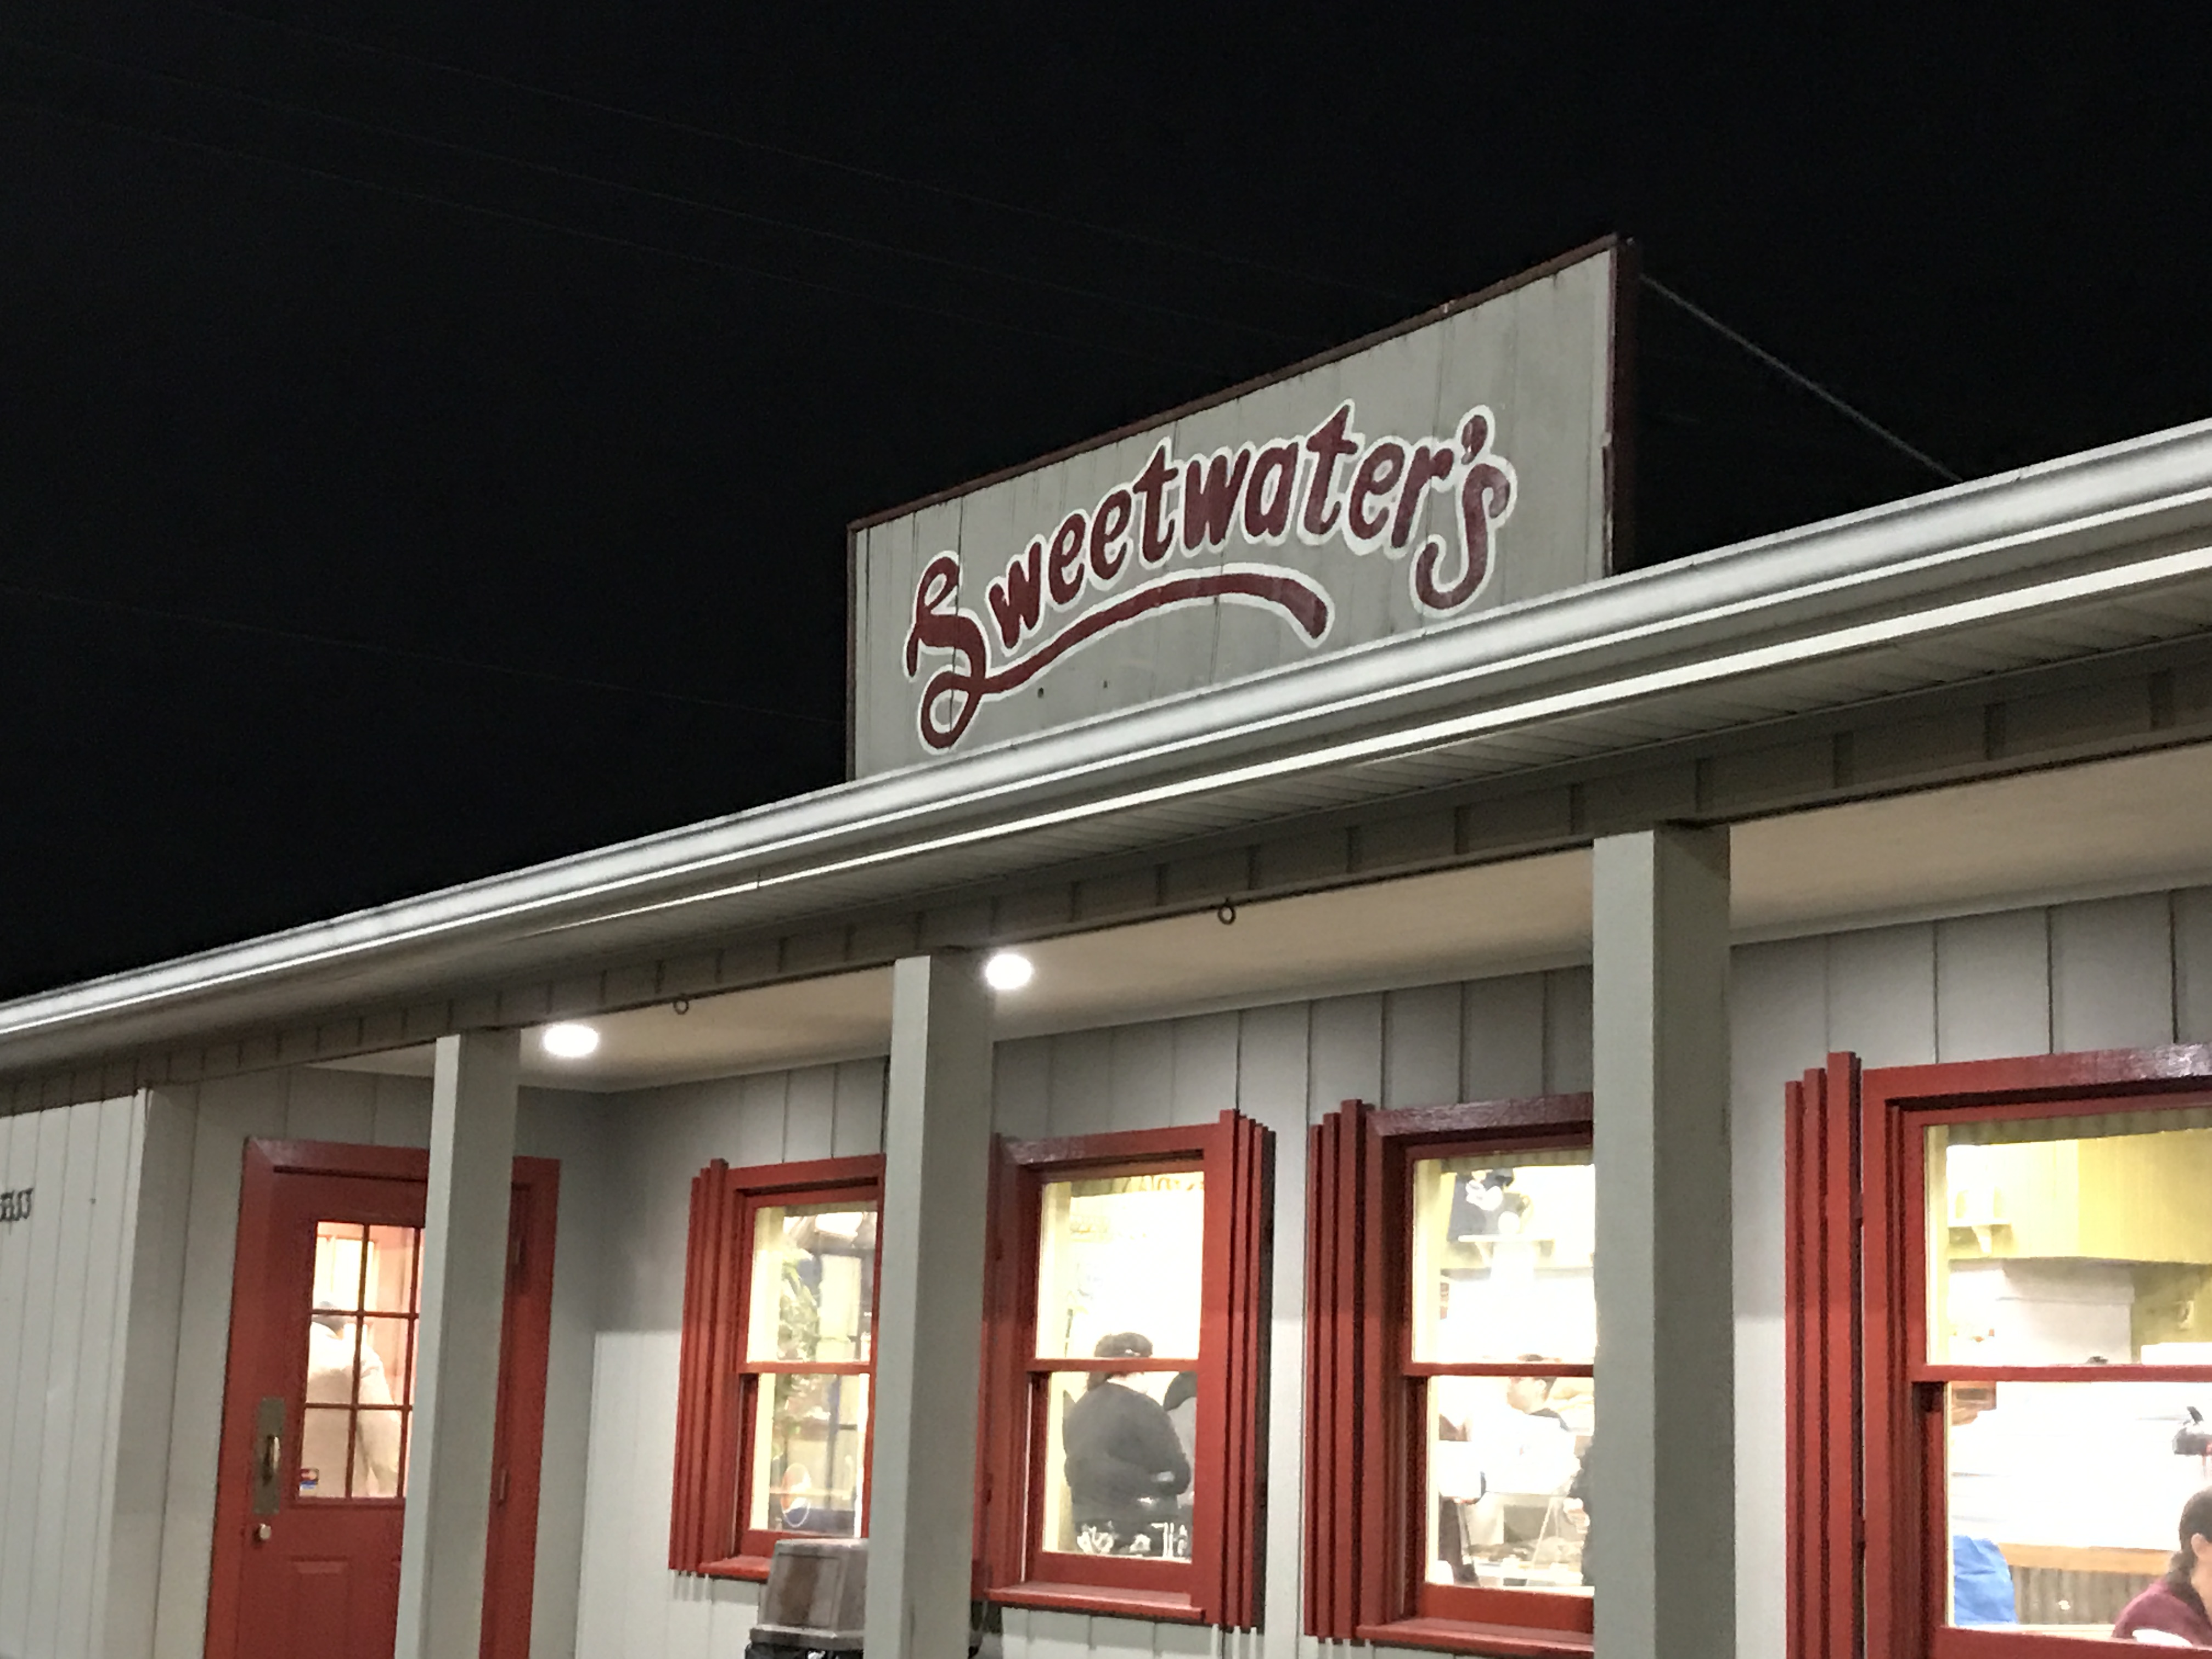 Sweetwater’s